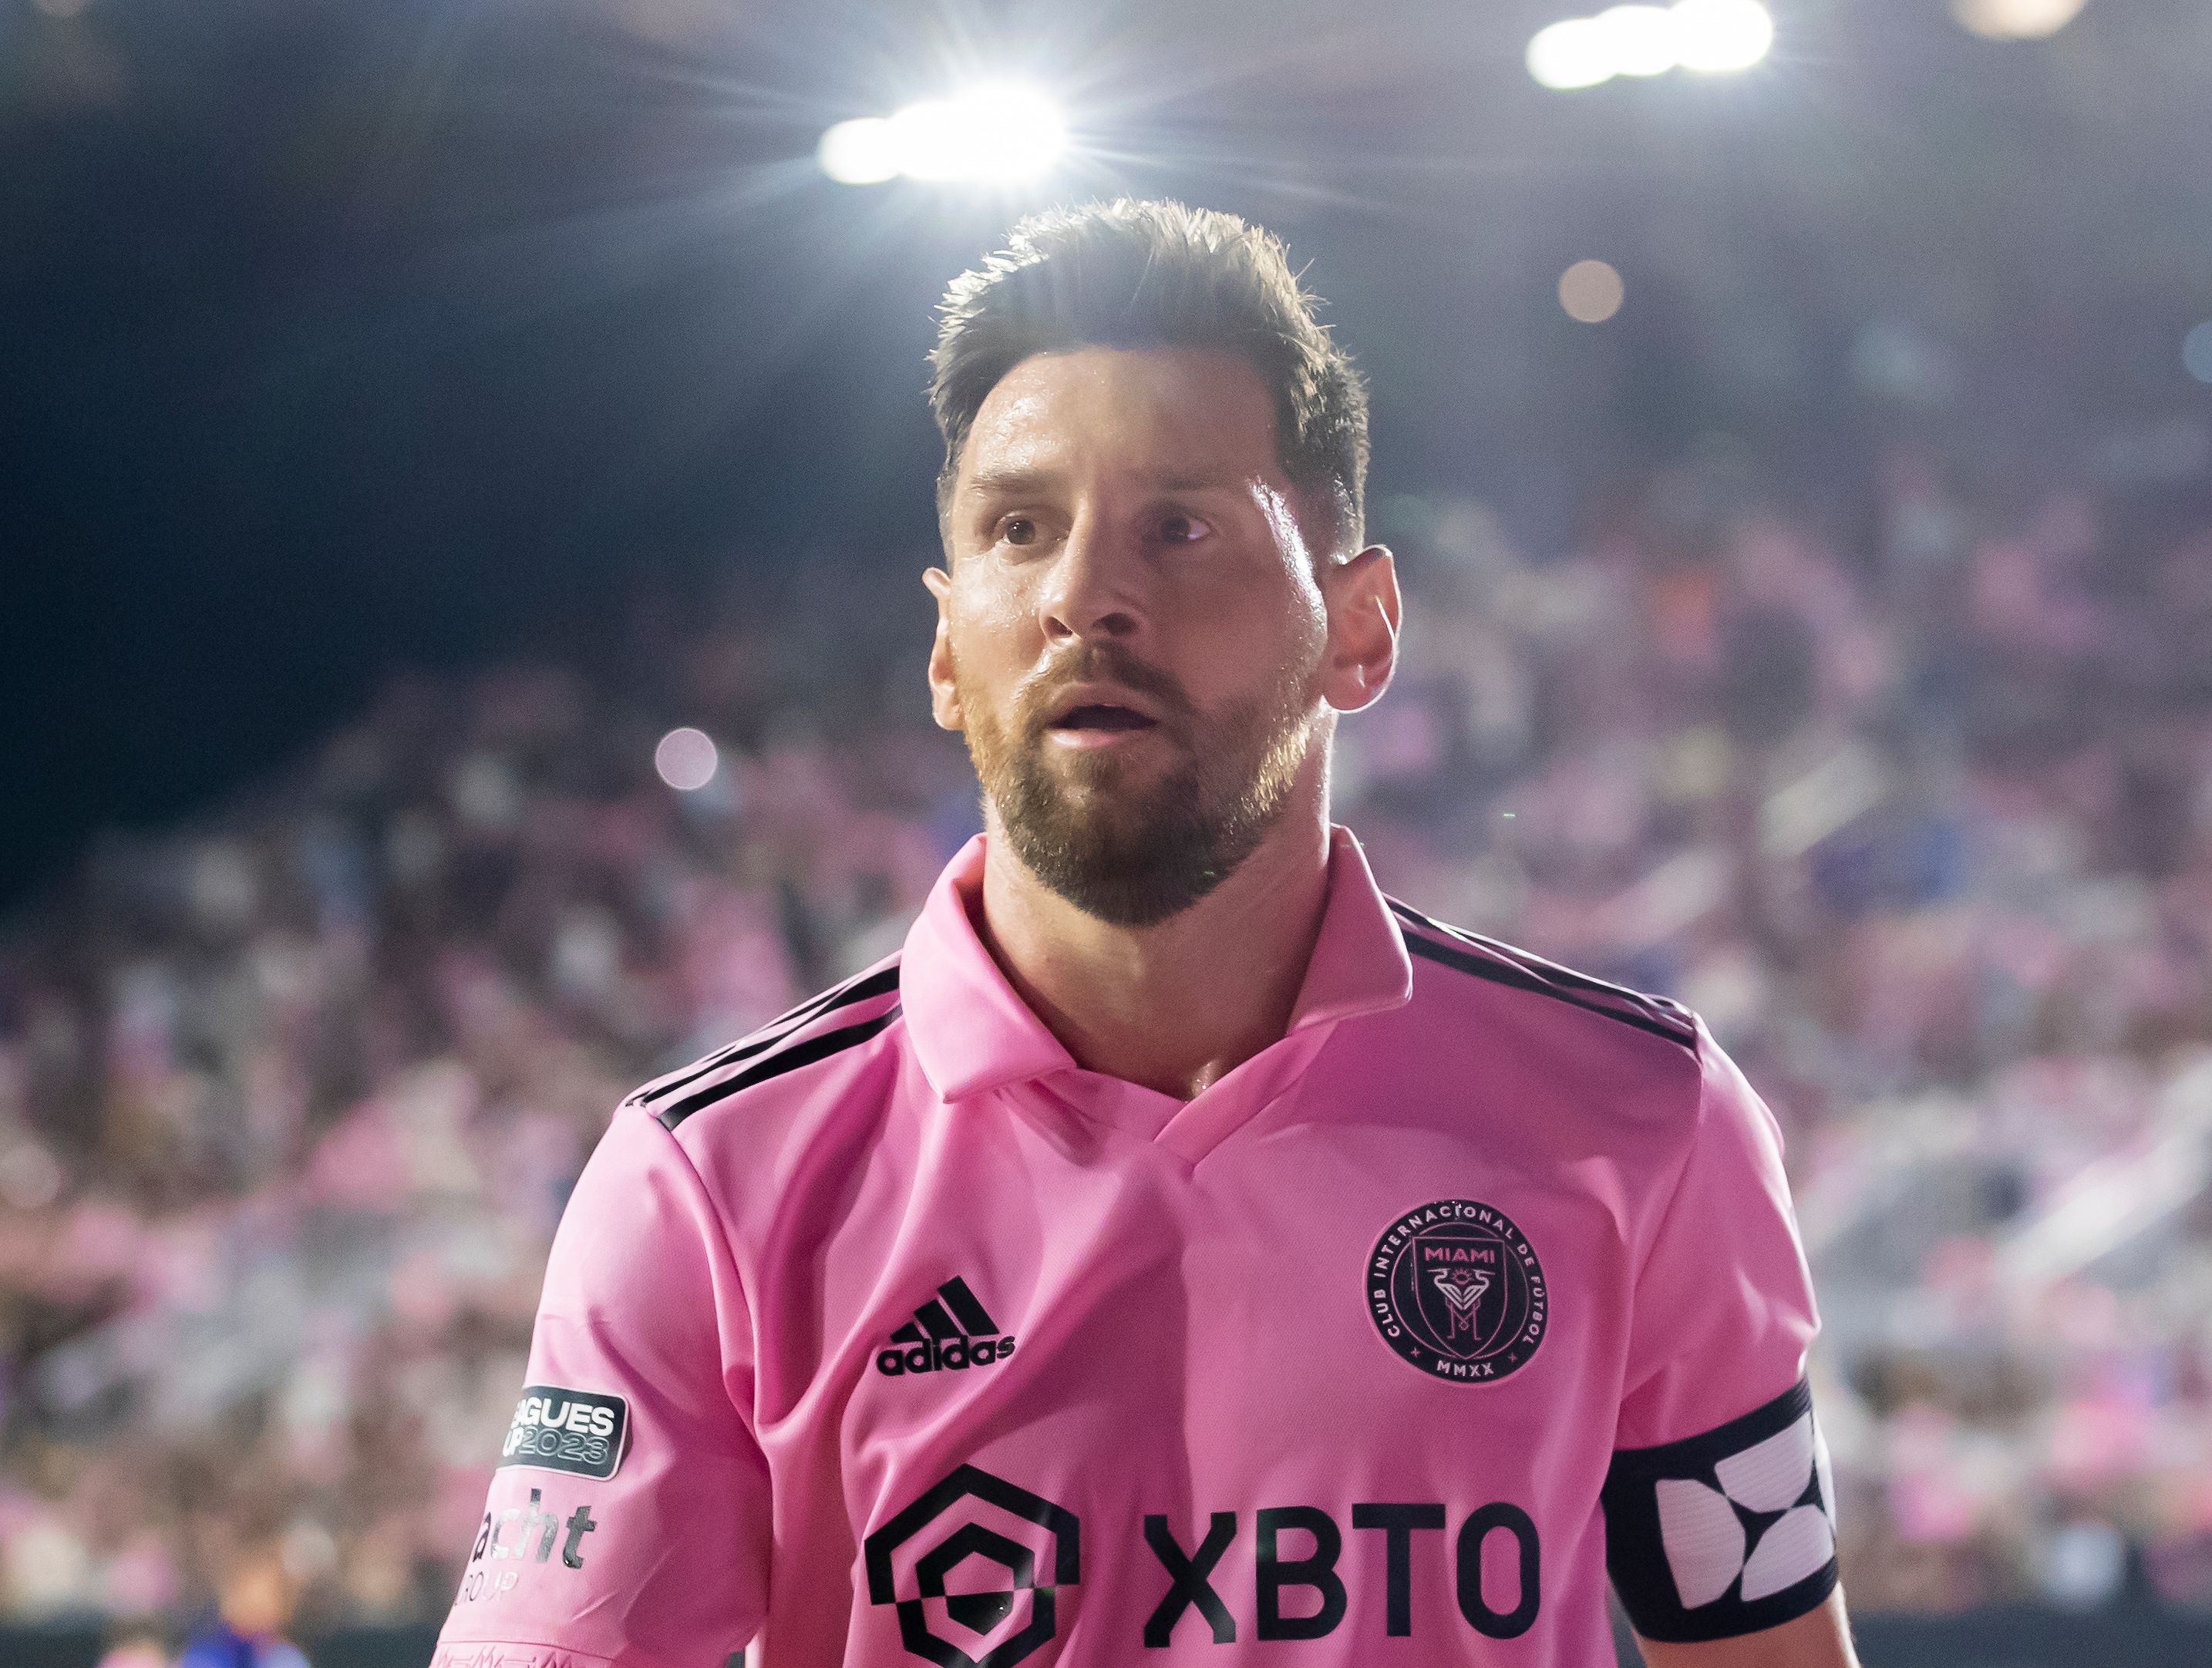 T-Mobile subscribers can get MLS Season Pass for free